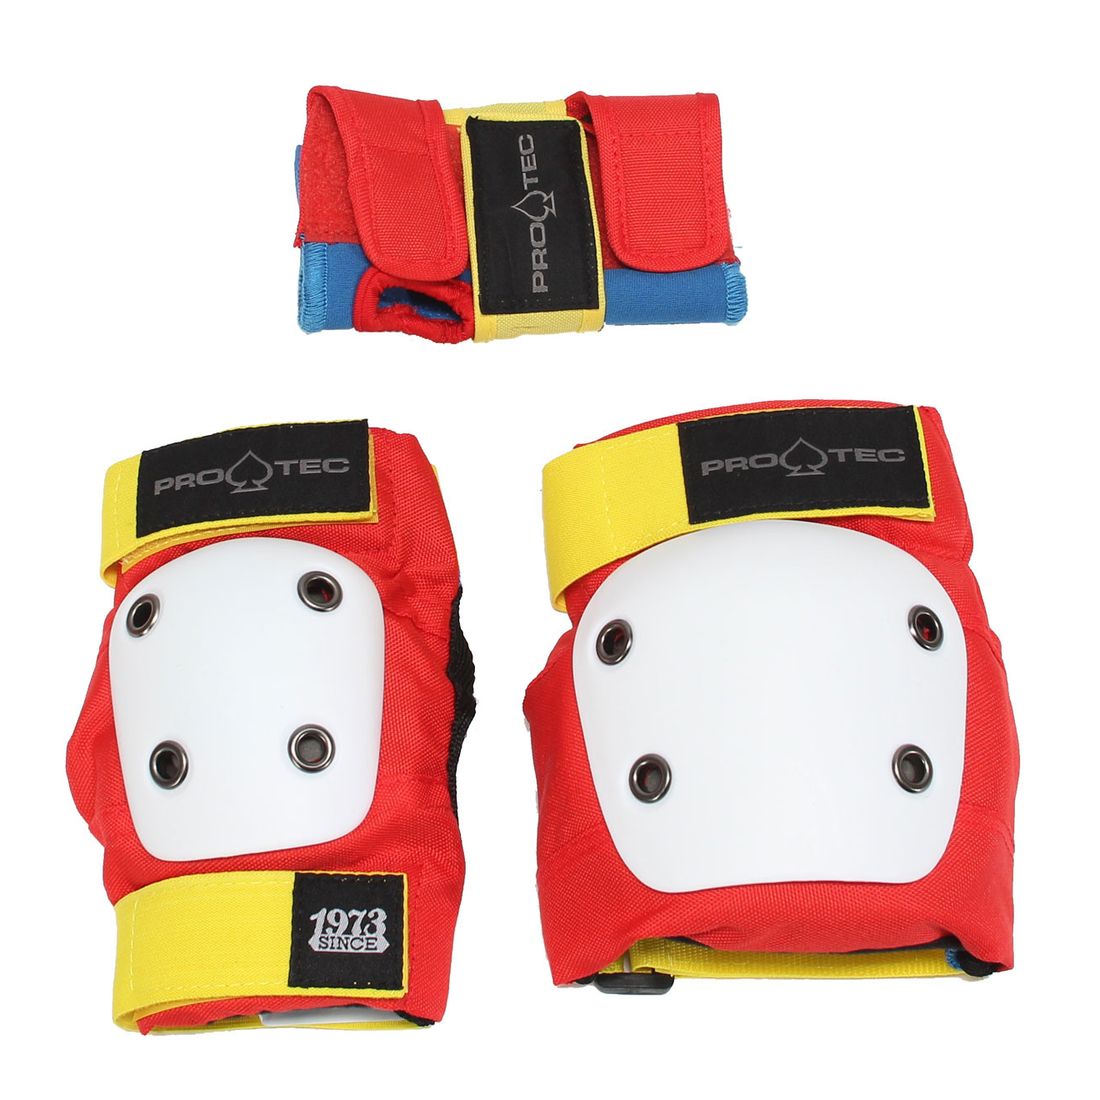 Pro-Tec Street Gear Junior Pad Set Red Set Of 3 (Youth Small)